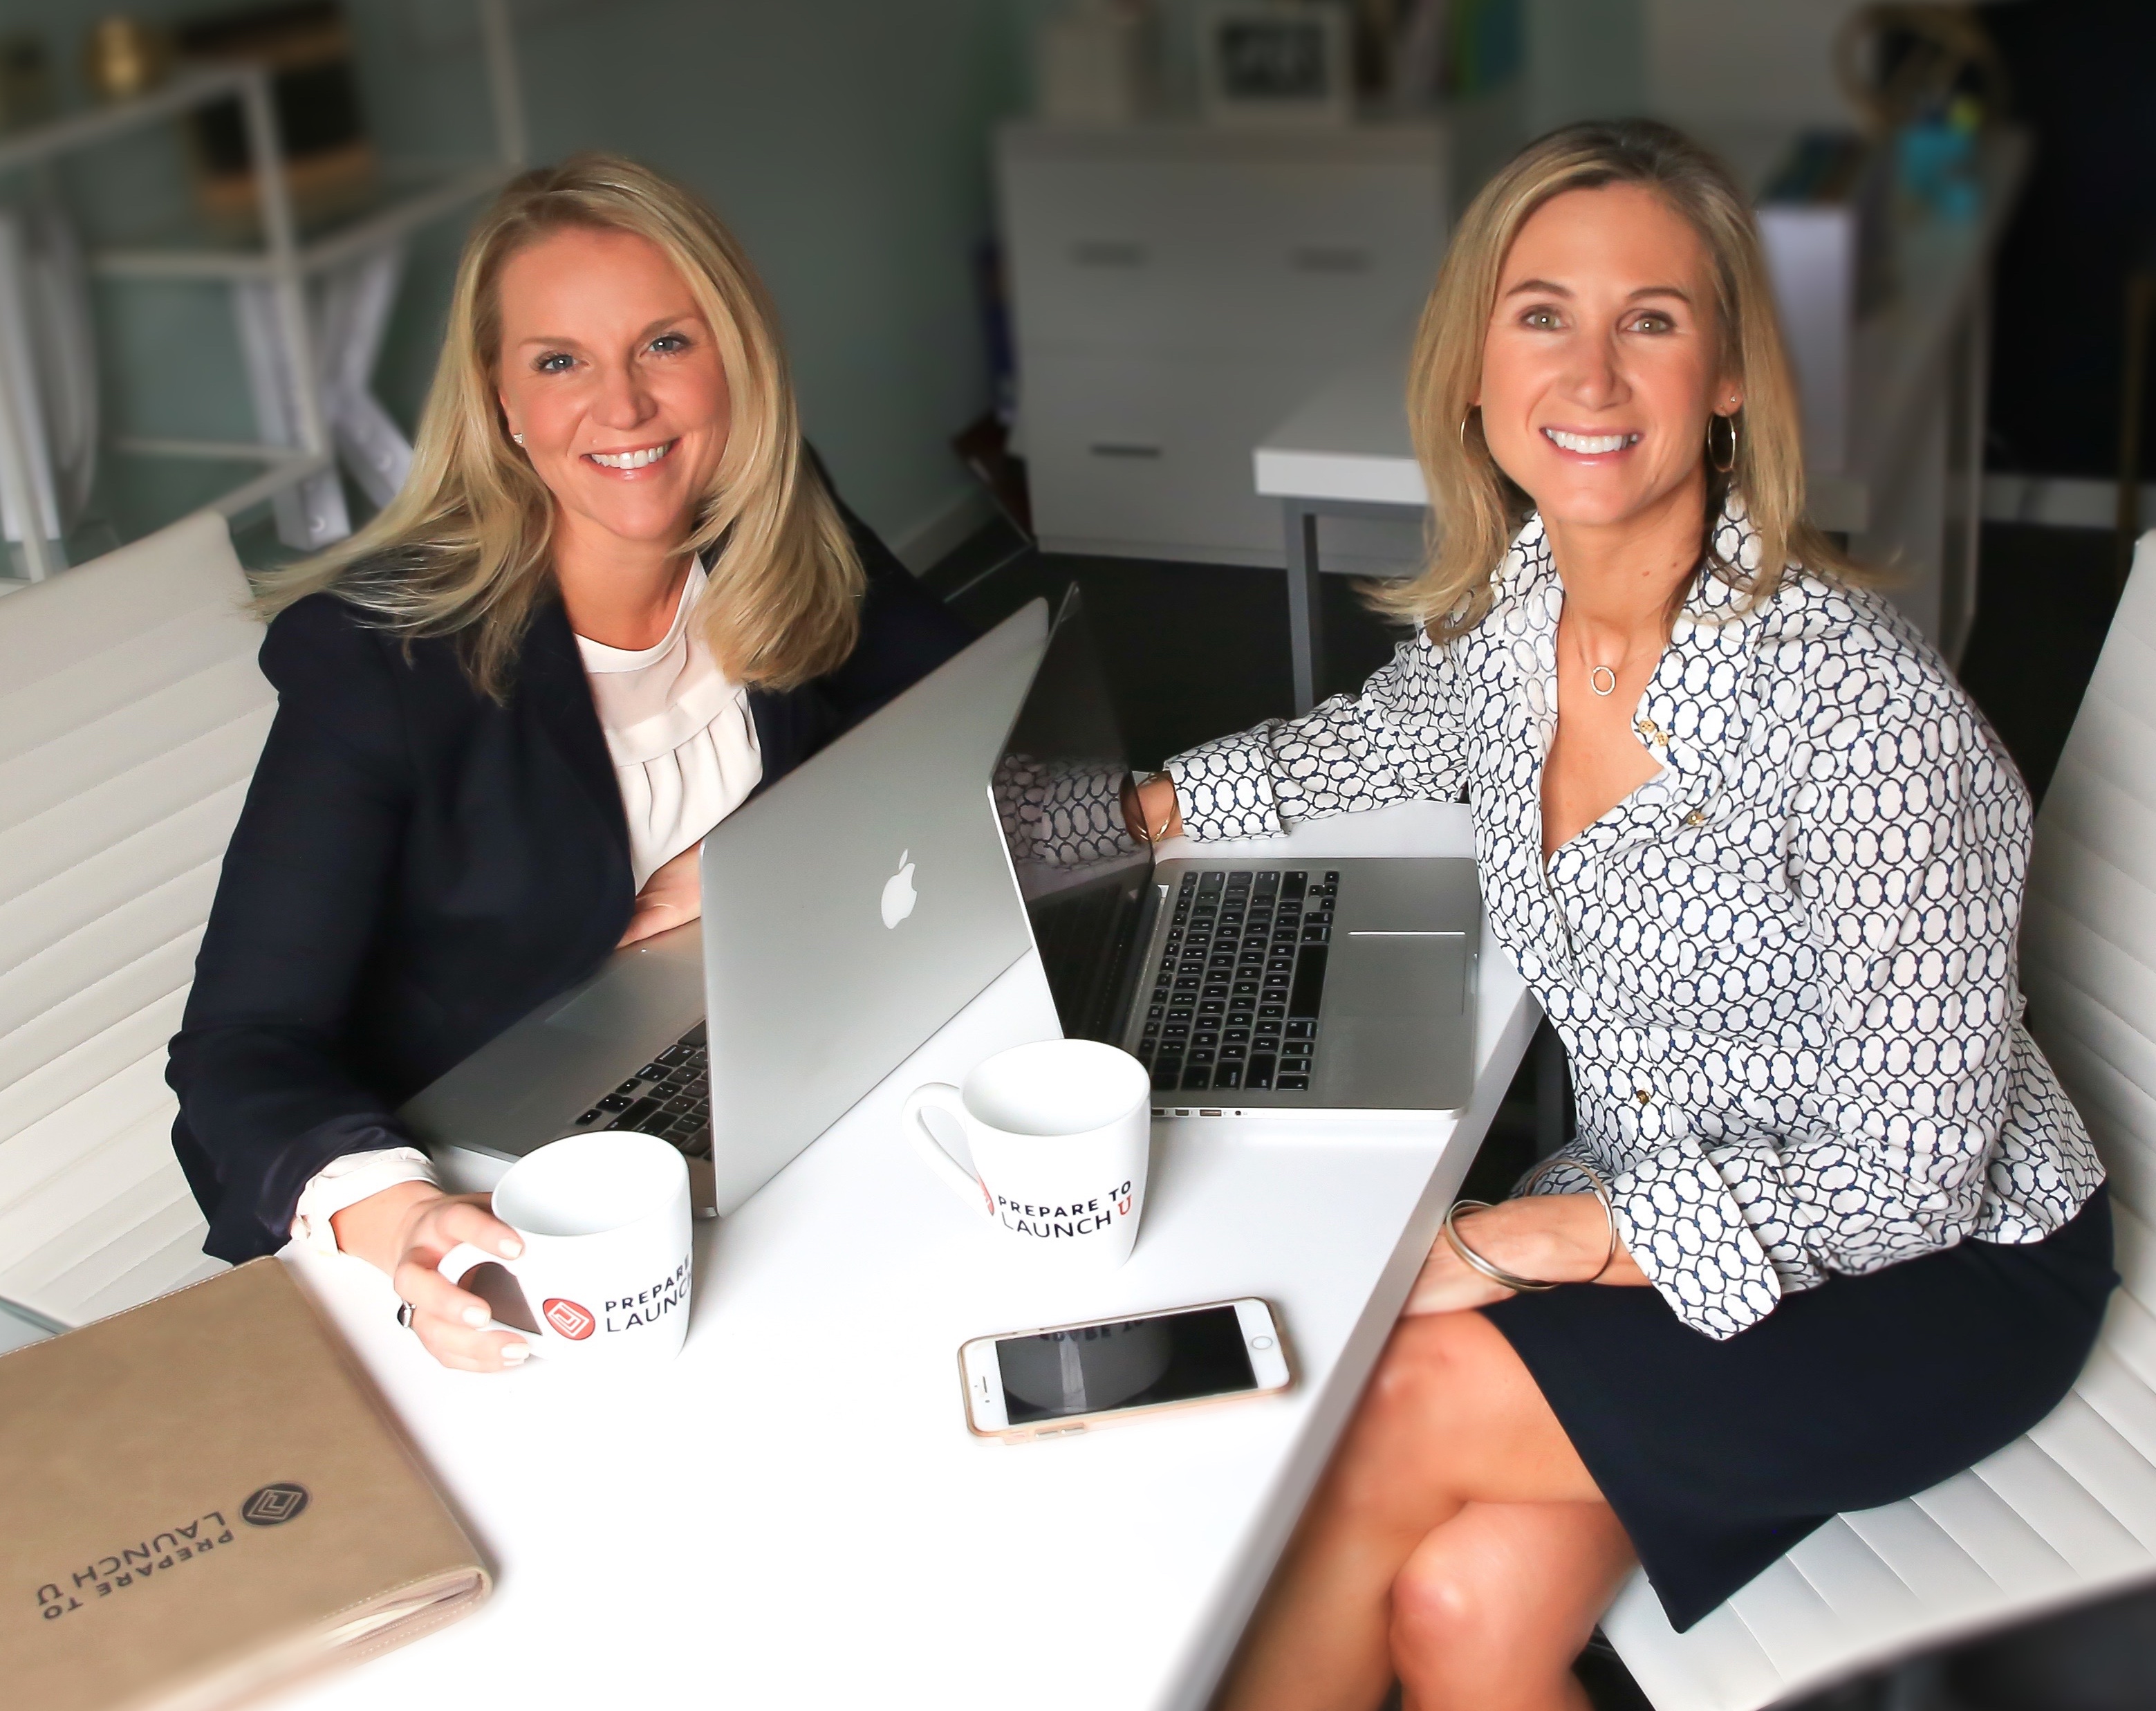 from left: Kelley Biskupiak and Susan Rietano Davey, Co-founders of Prepare To Launch U, have created the definitive online women’s career re-entry course.